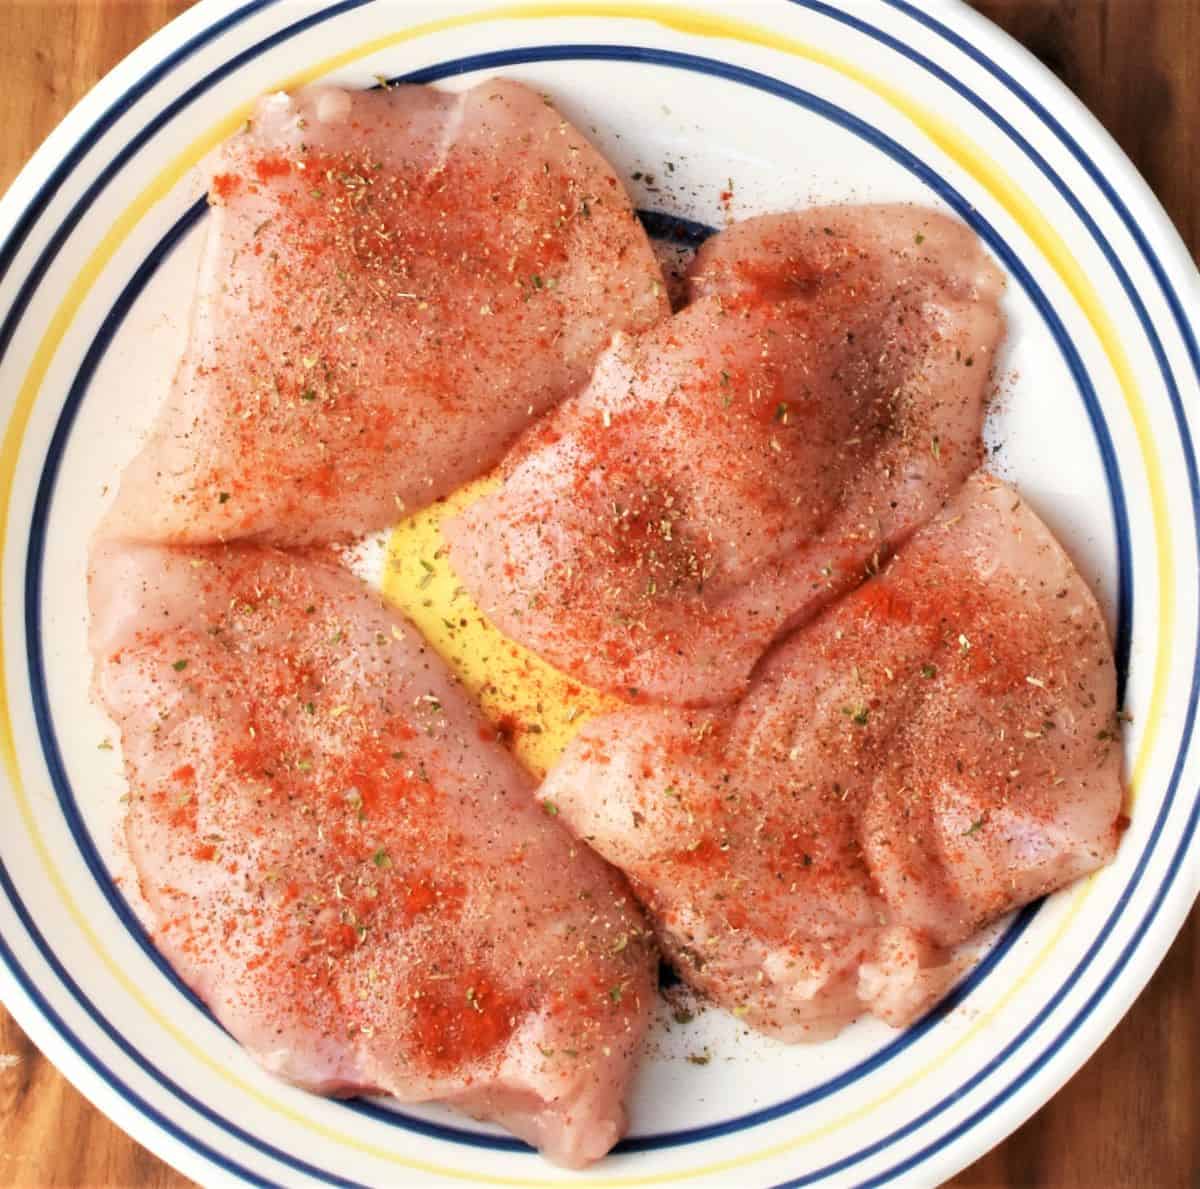 4 skinless chicken breasts  with seasoning in large bowl.